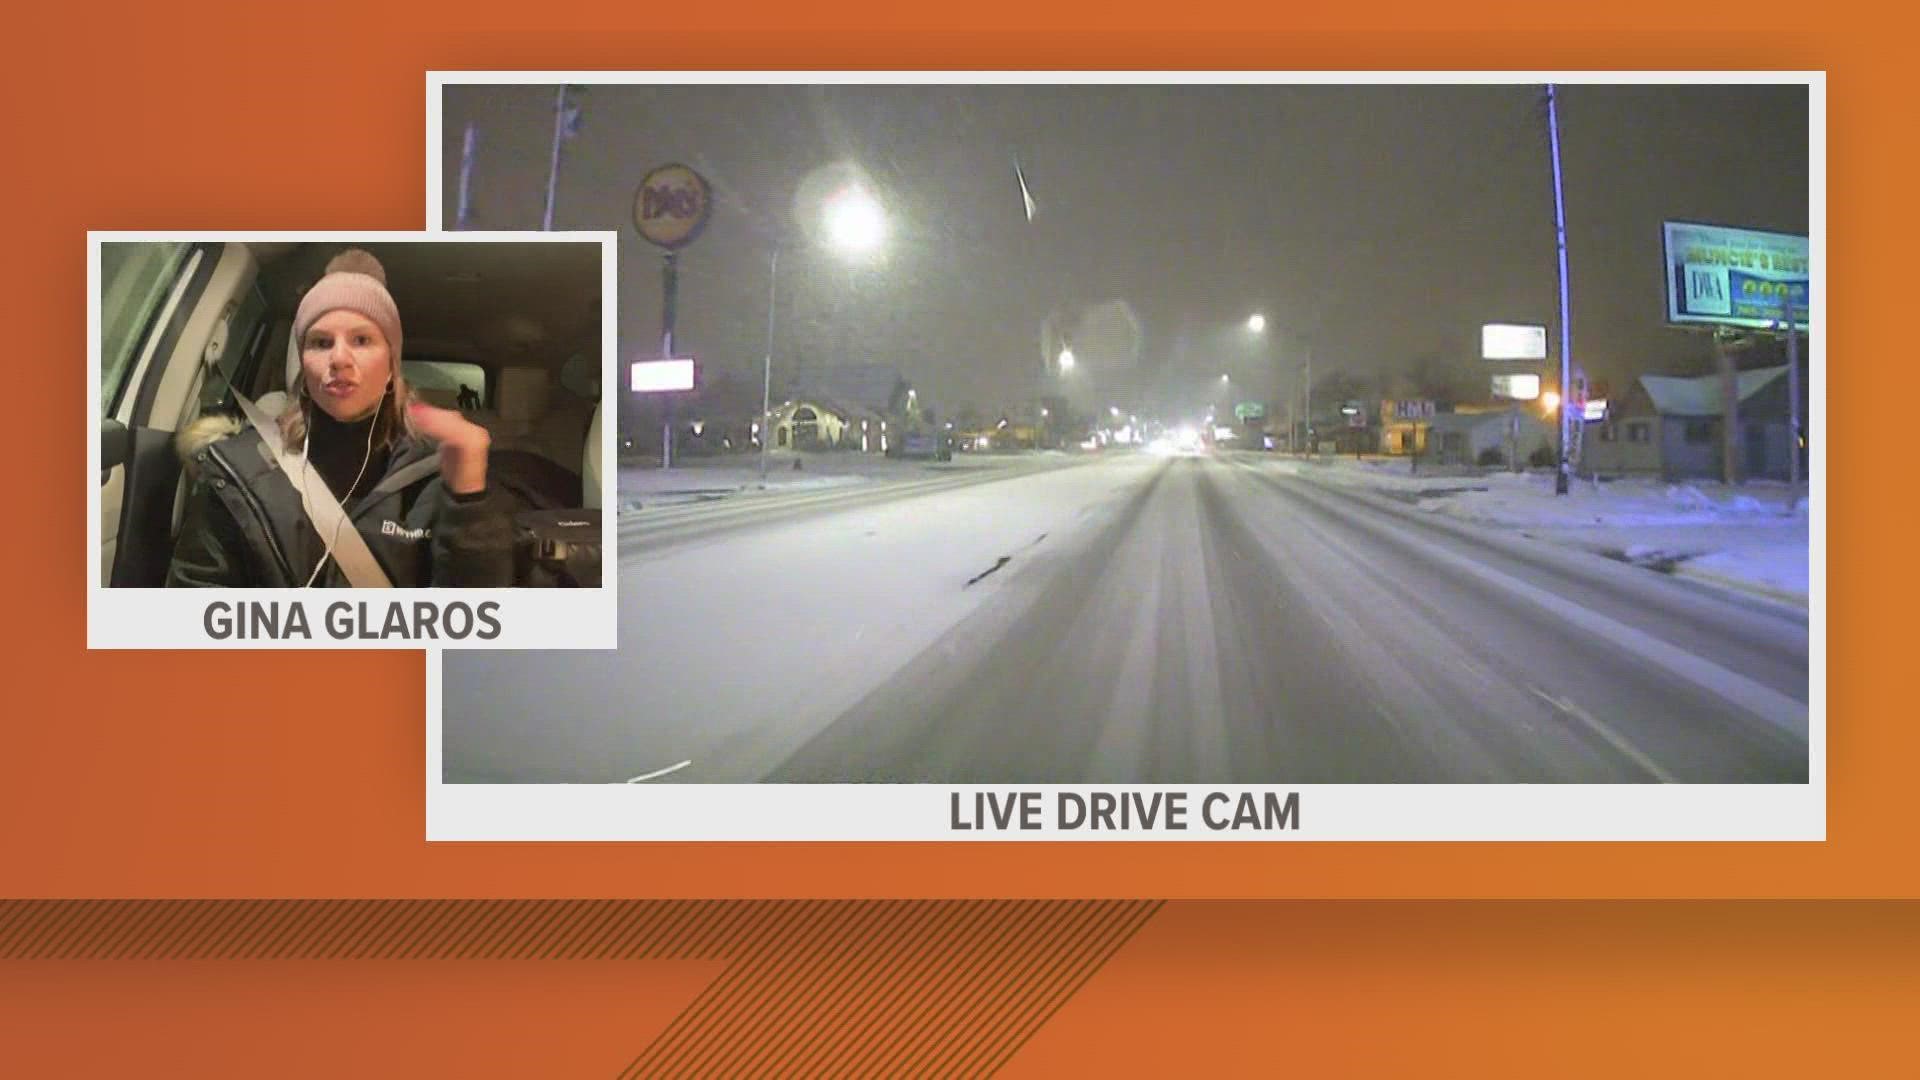 Gina Glaros has an update on road conditions.